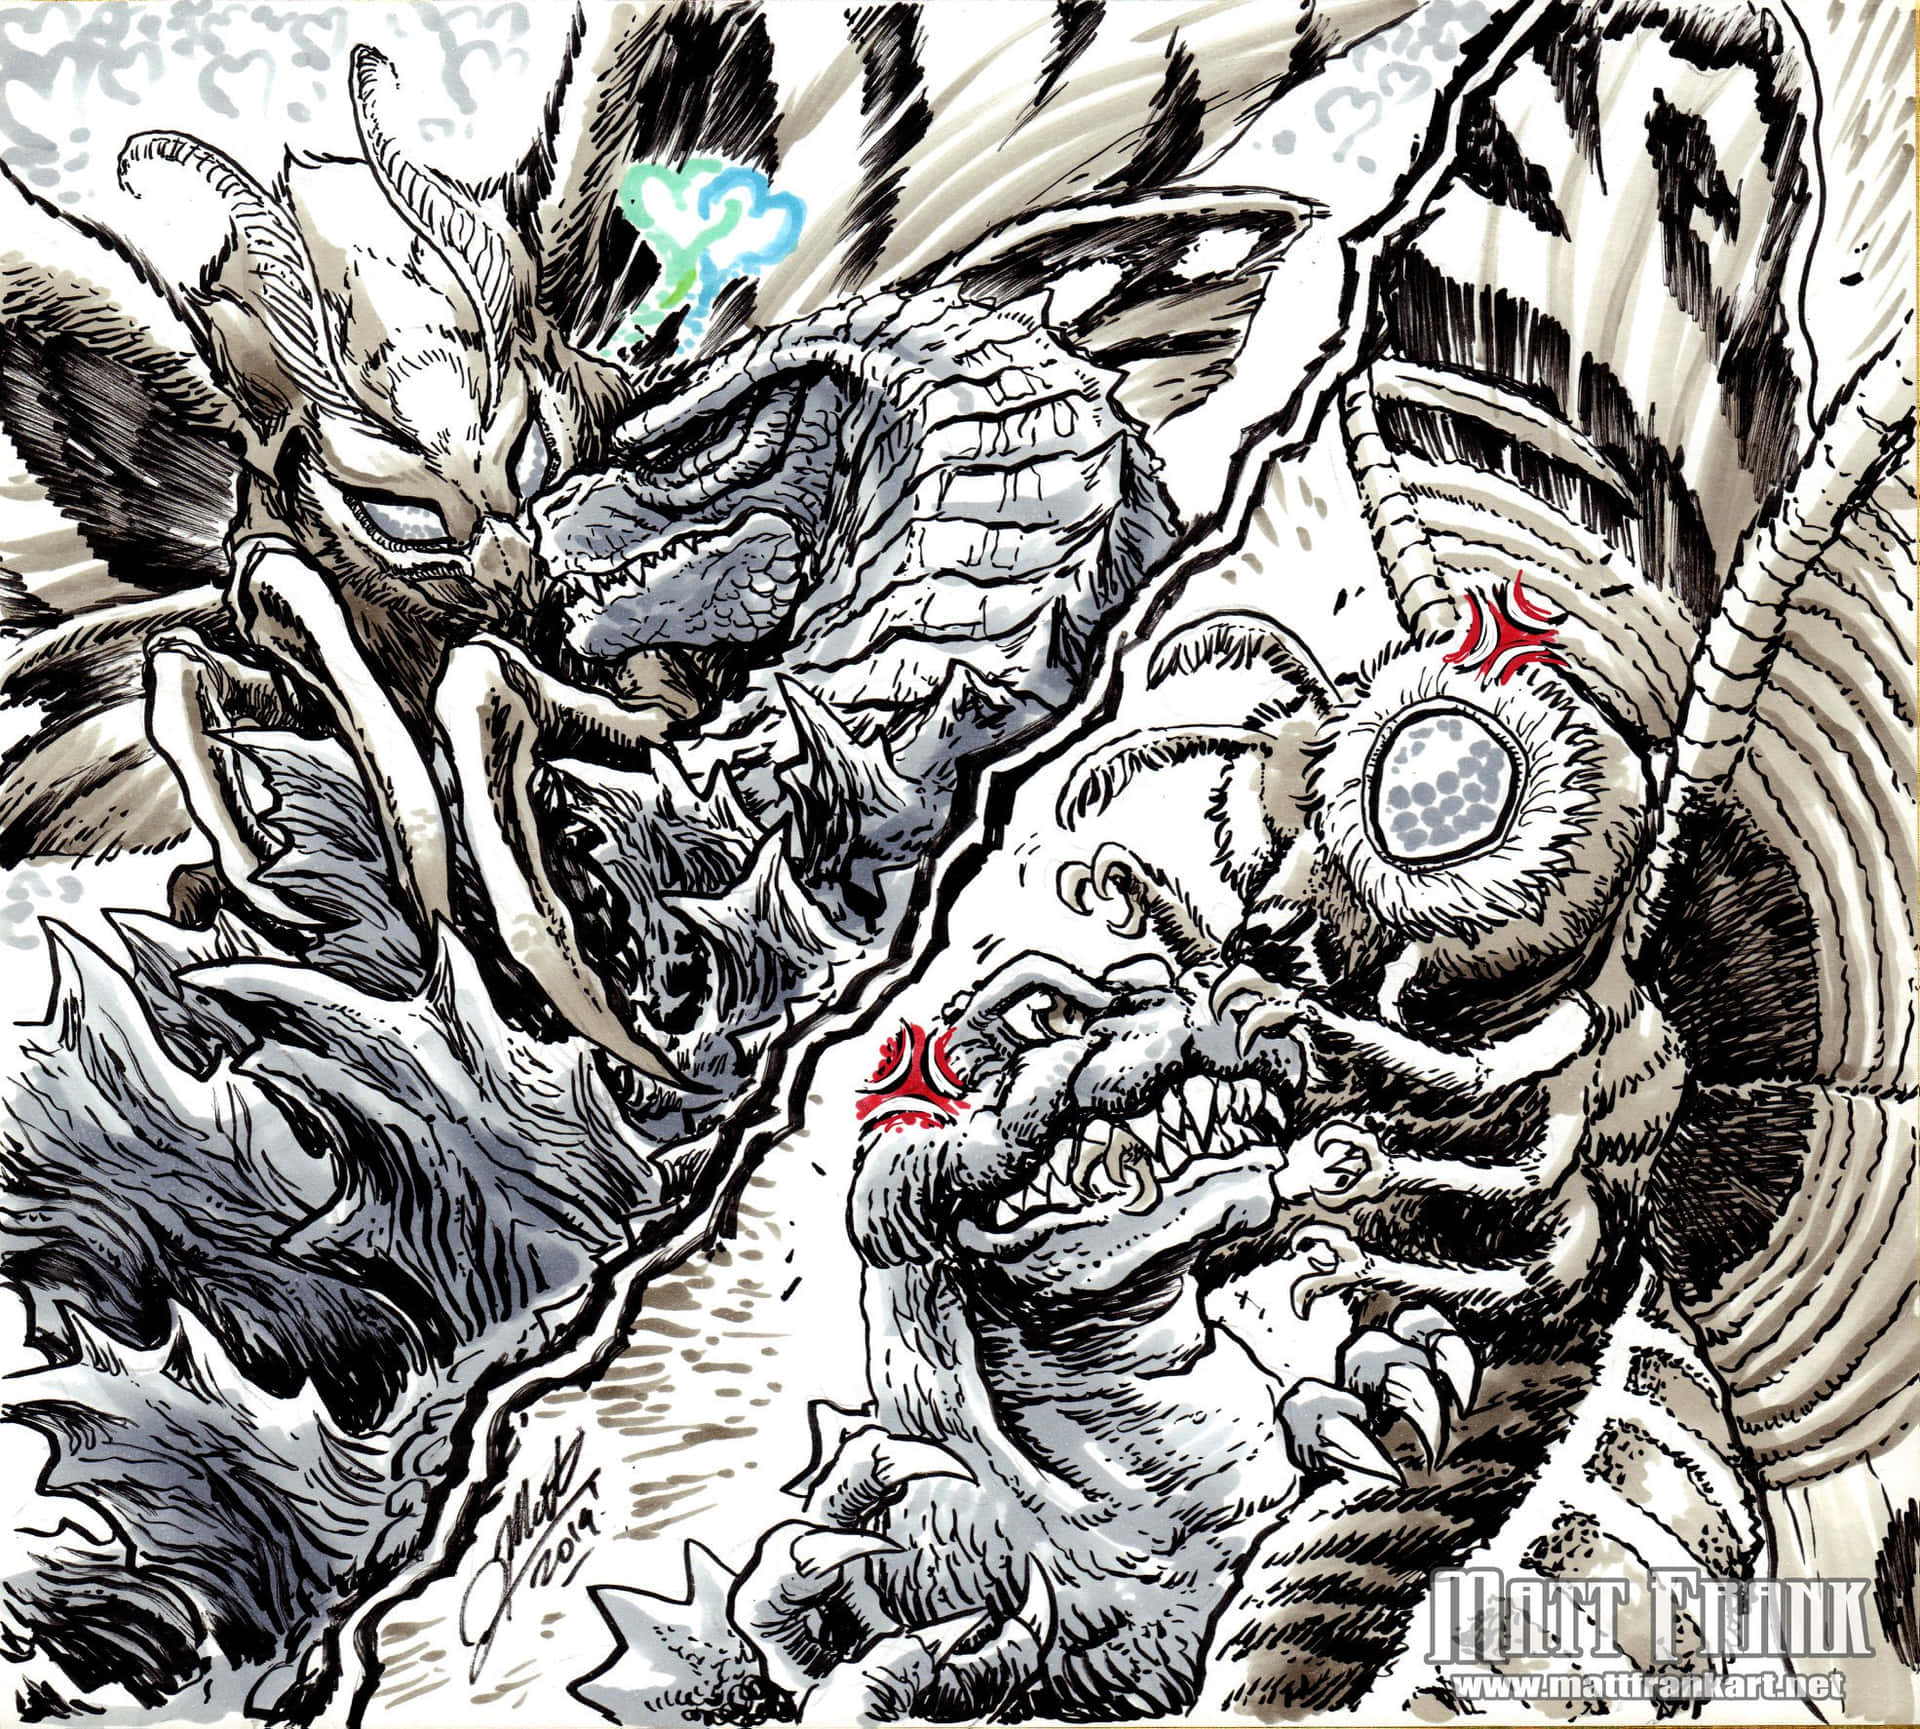 Godzilla and Mothra facing off in an epic battle Wallpaper